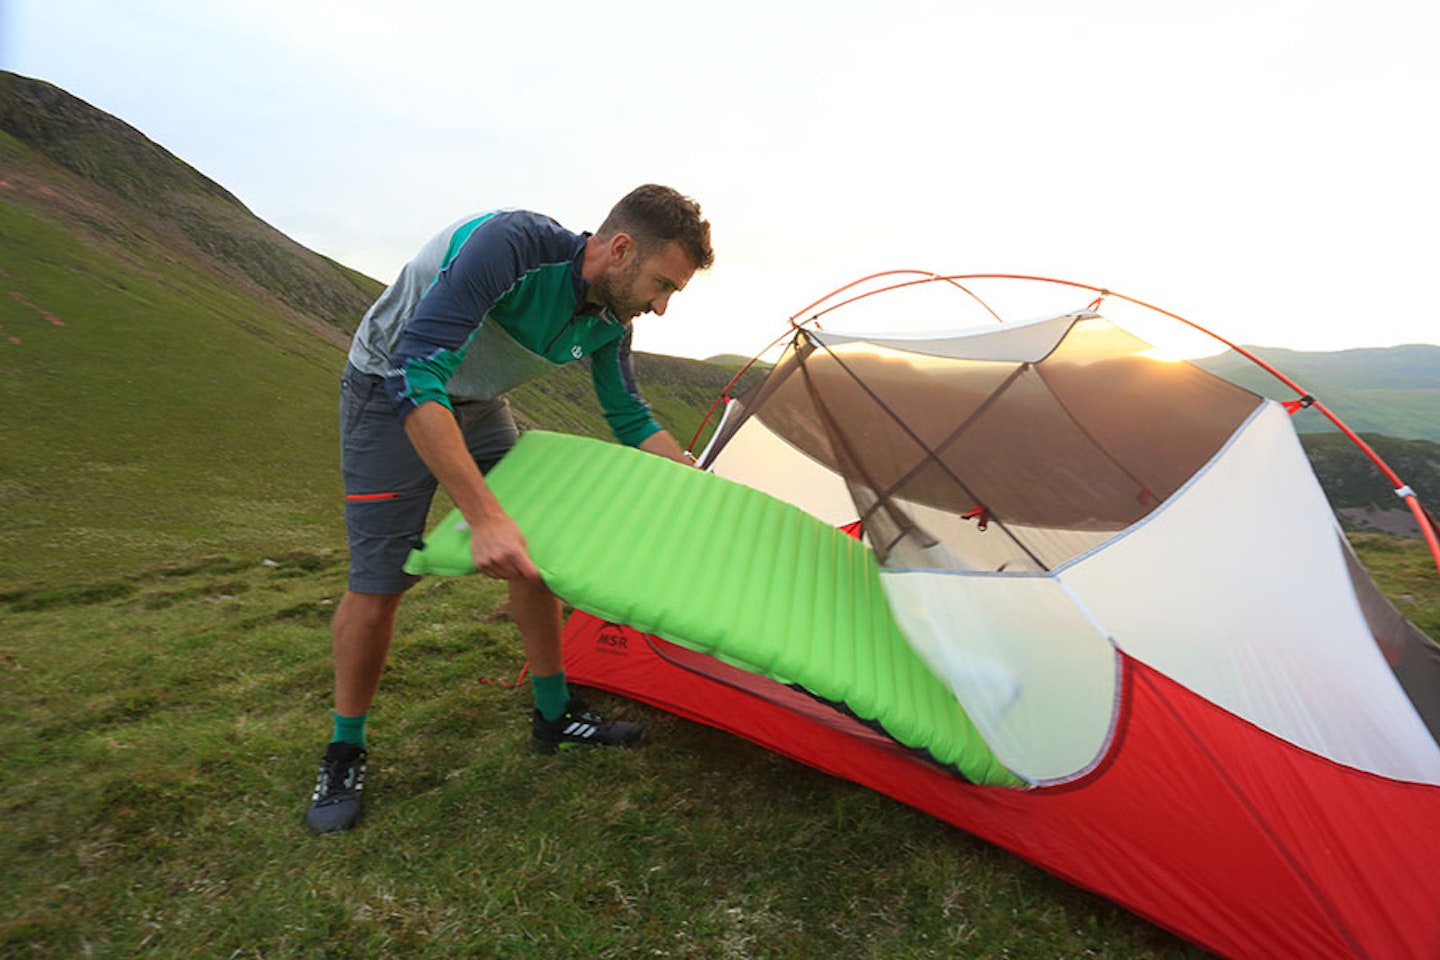 man in shorts putting inflated sleeping mat into a tent in the mountains